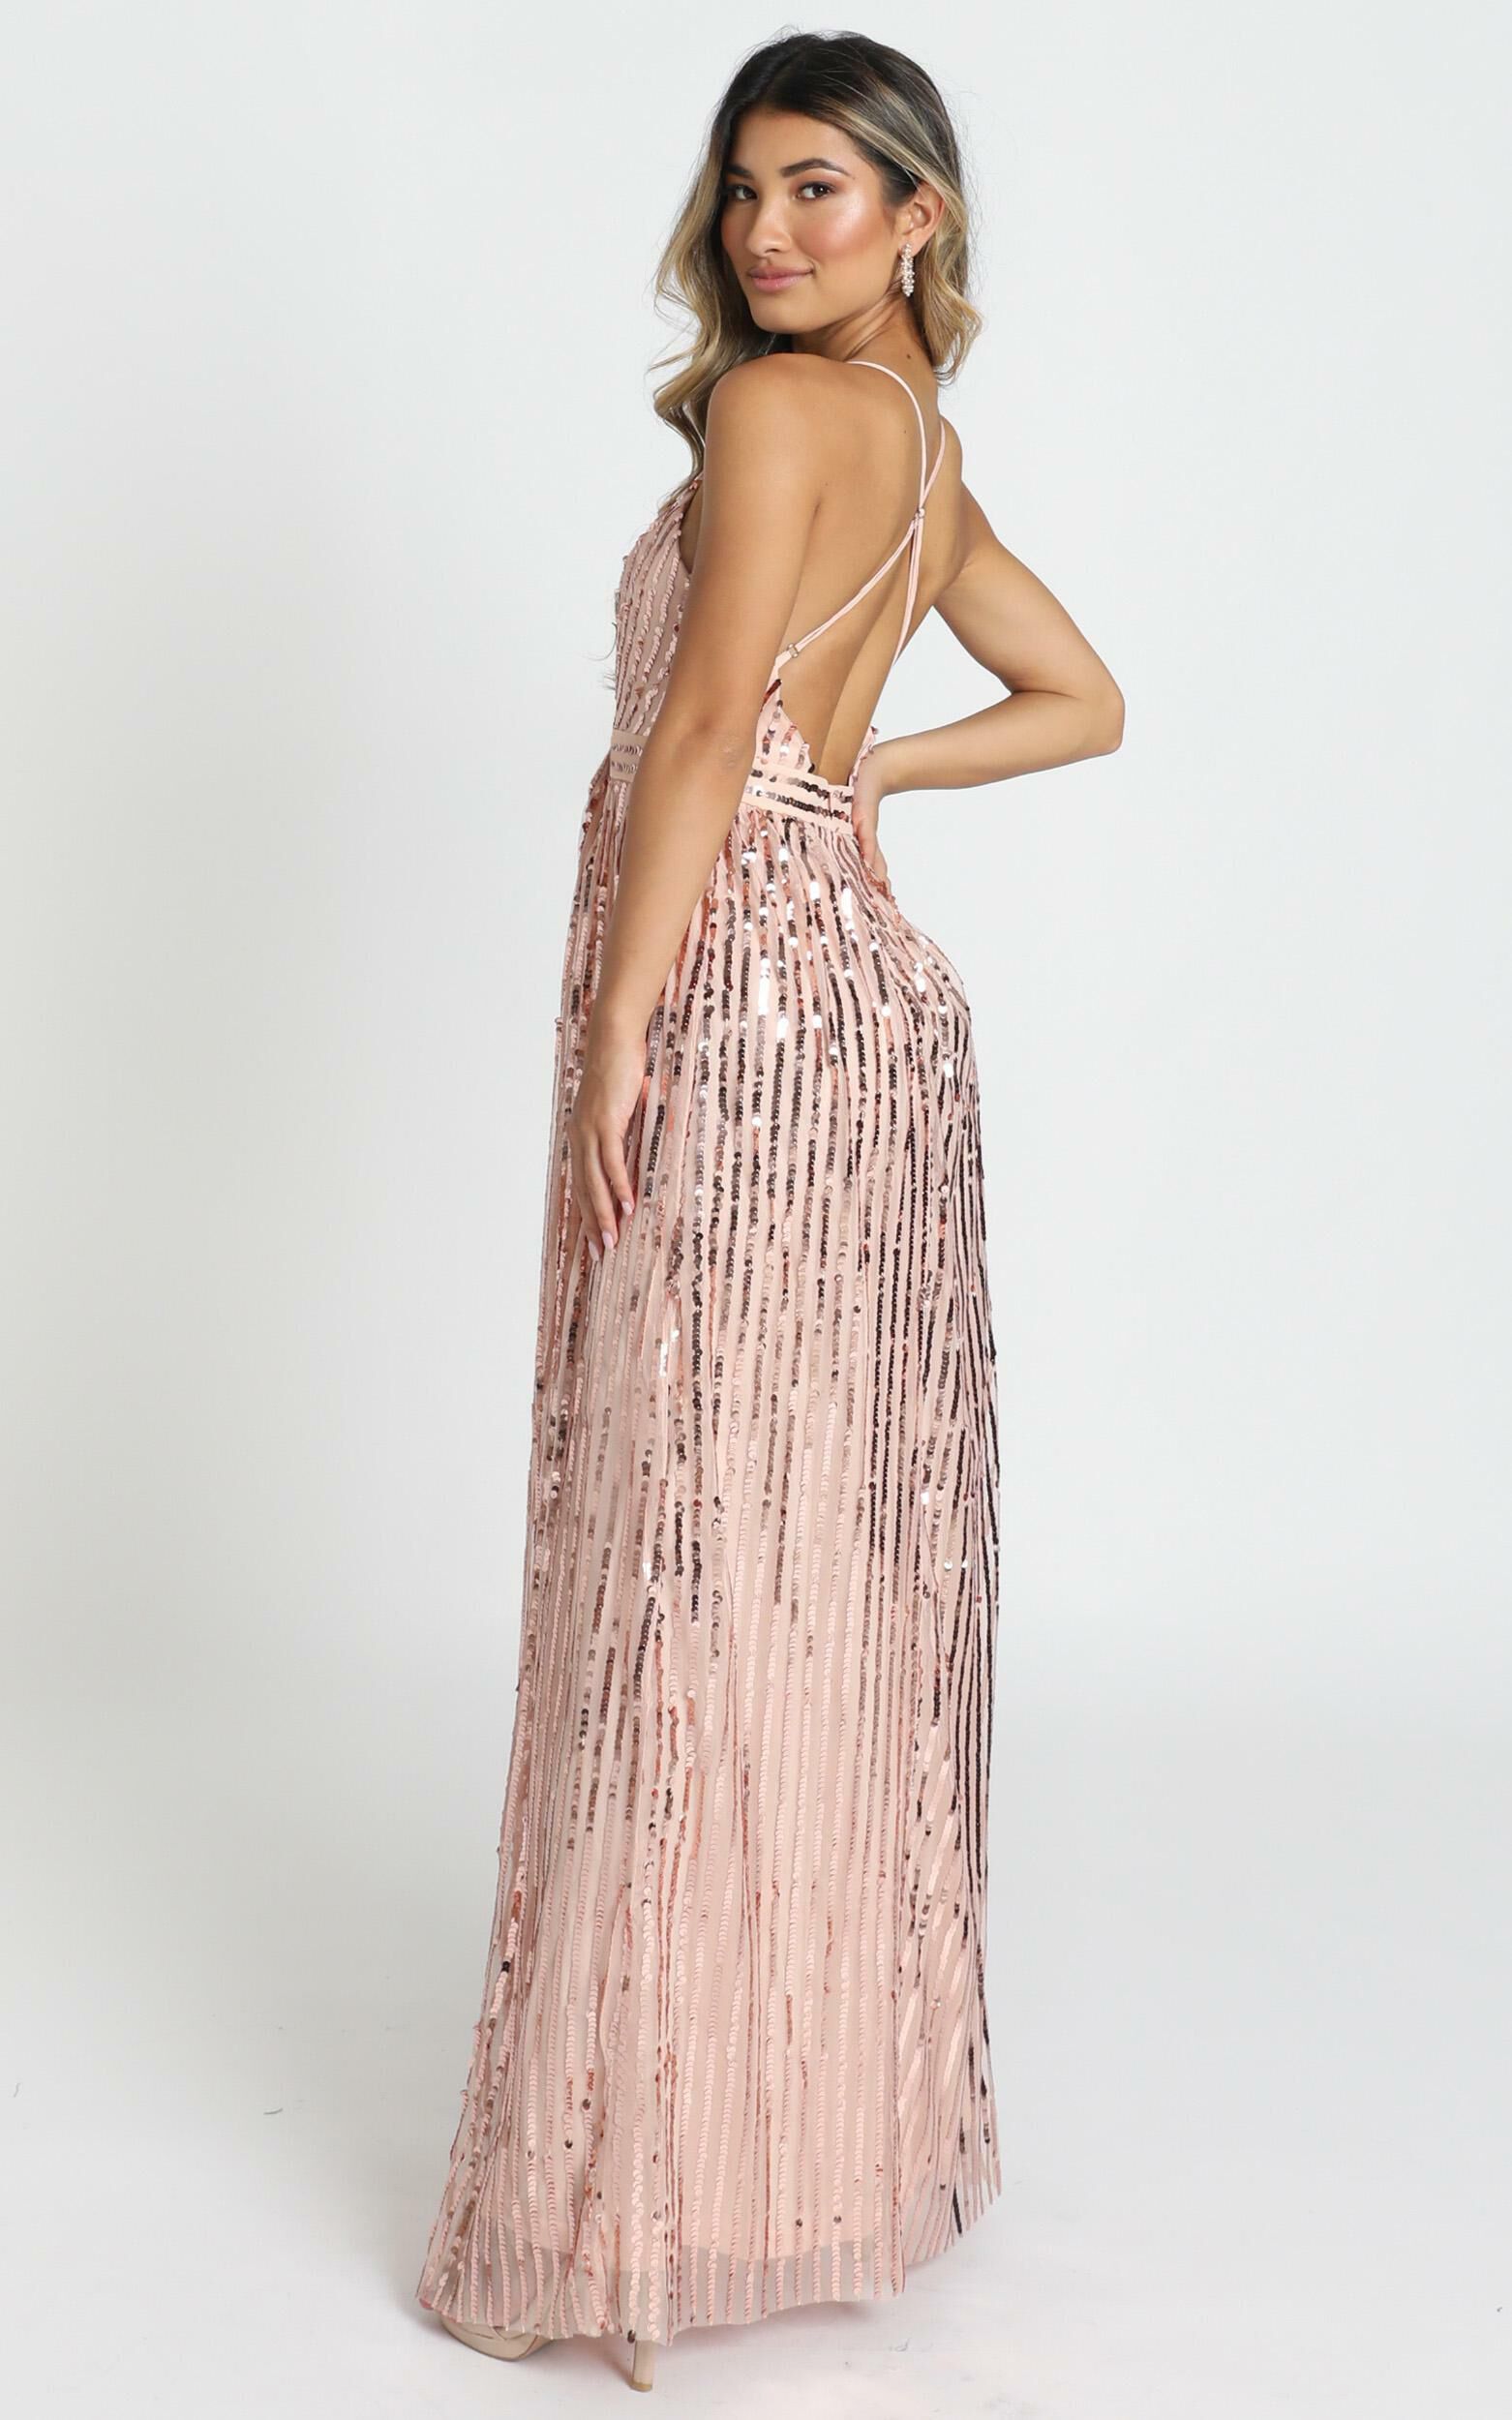 be my lover dress in rose gold sequin